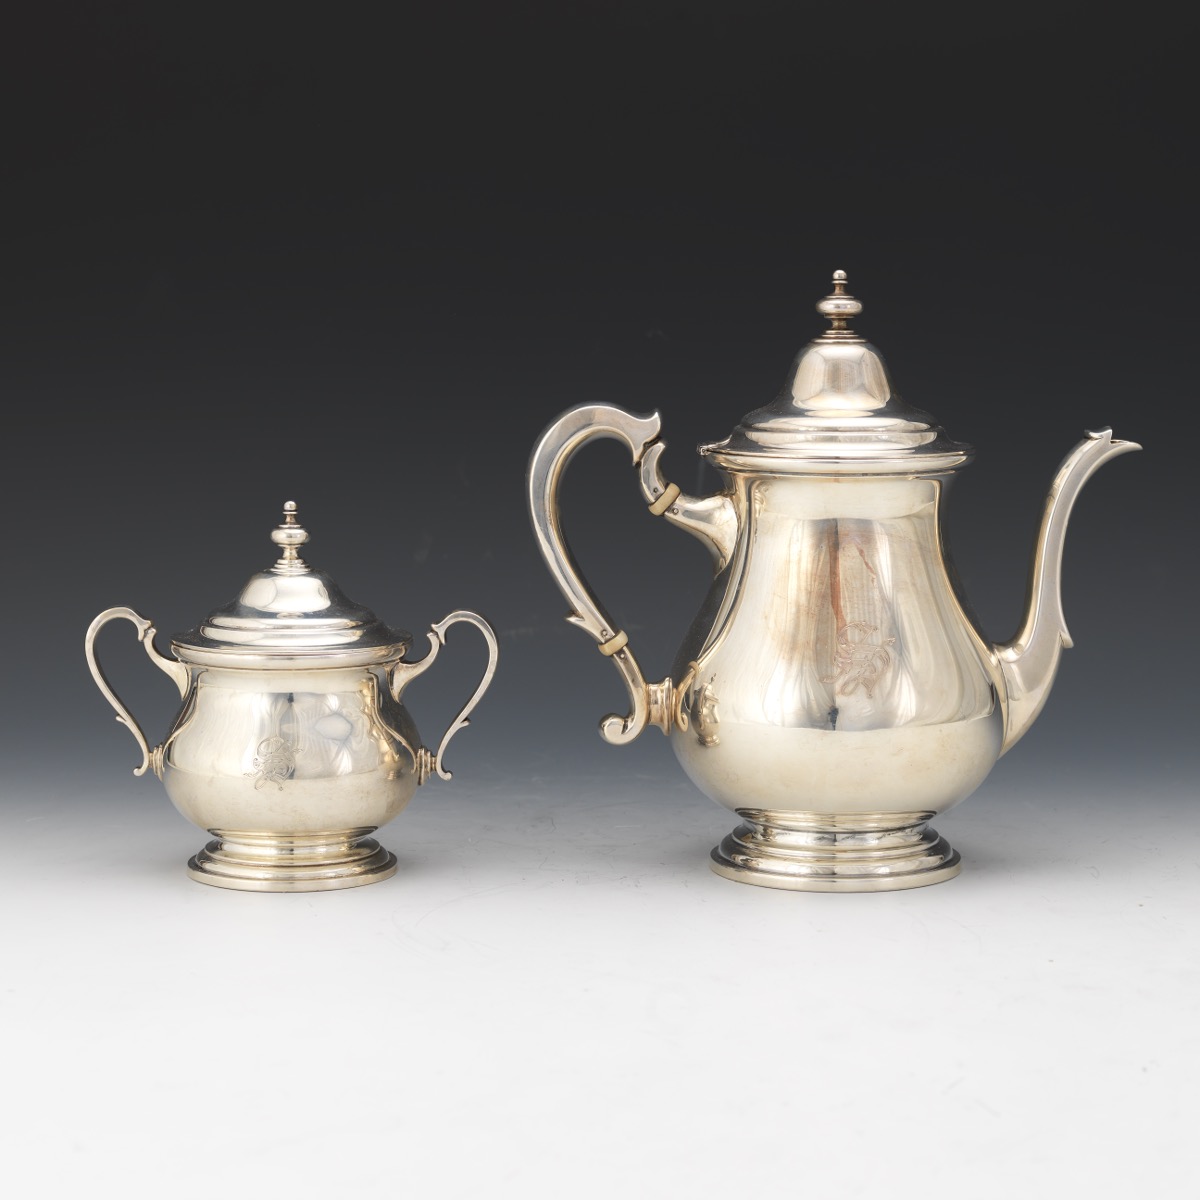 Graff, Washbourne & Dunn Sterling Silver Tea and Coffee Service - Image 2 of 20